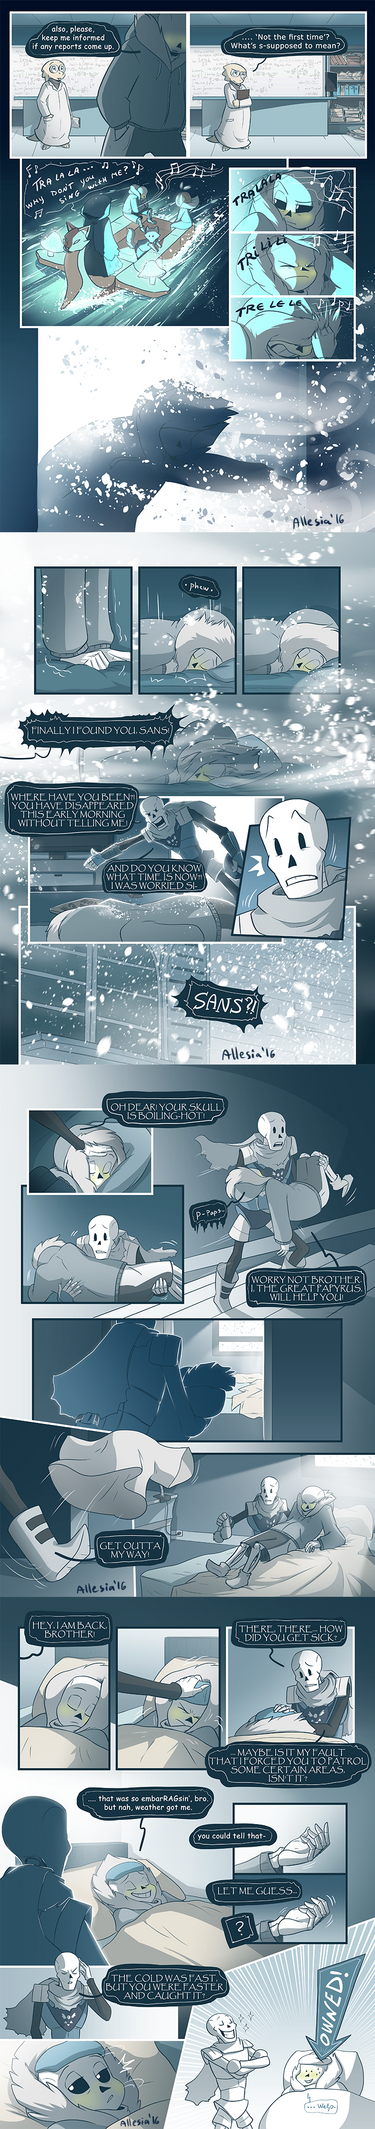 Timetale - Chapter 02 - Part I - Page 16-19